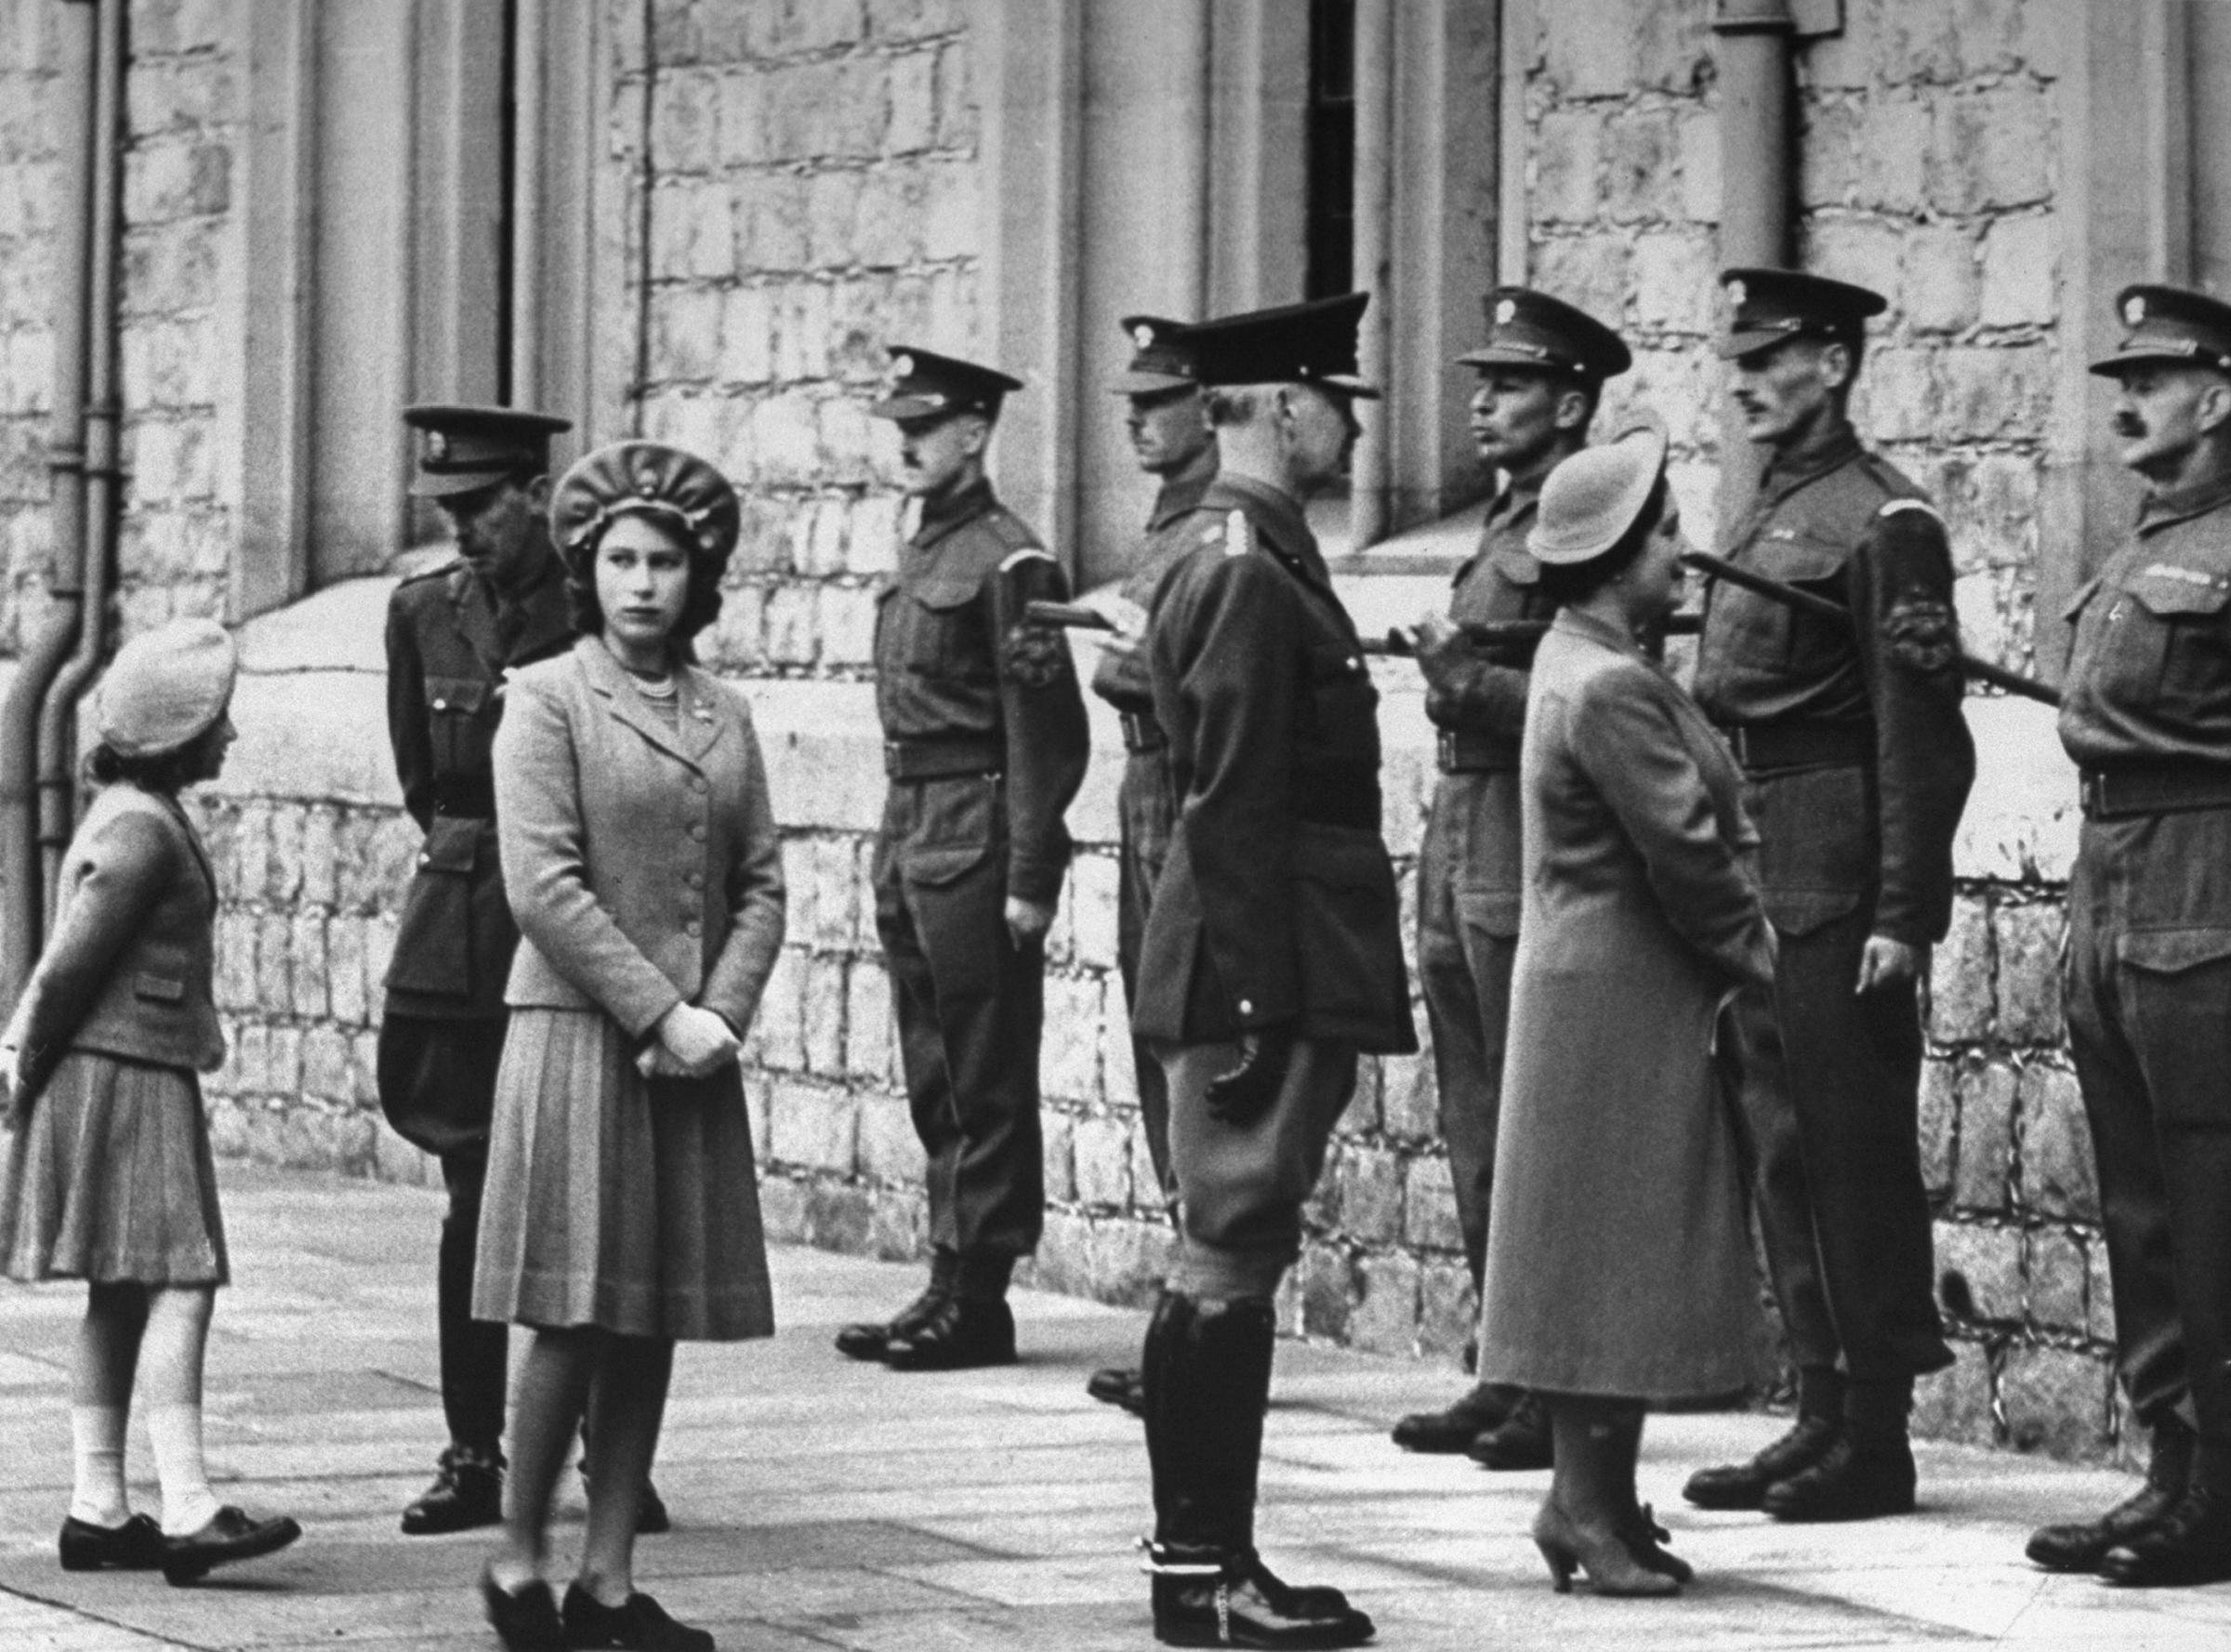 Princess Margaret (left), Princess Elizabeth (third from left) and the Queen (third from right) with the Grenadier guards on the occasion of Princess Elizabeth's birthday, 1942.